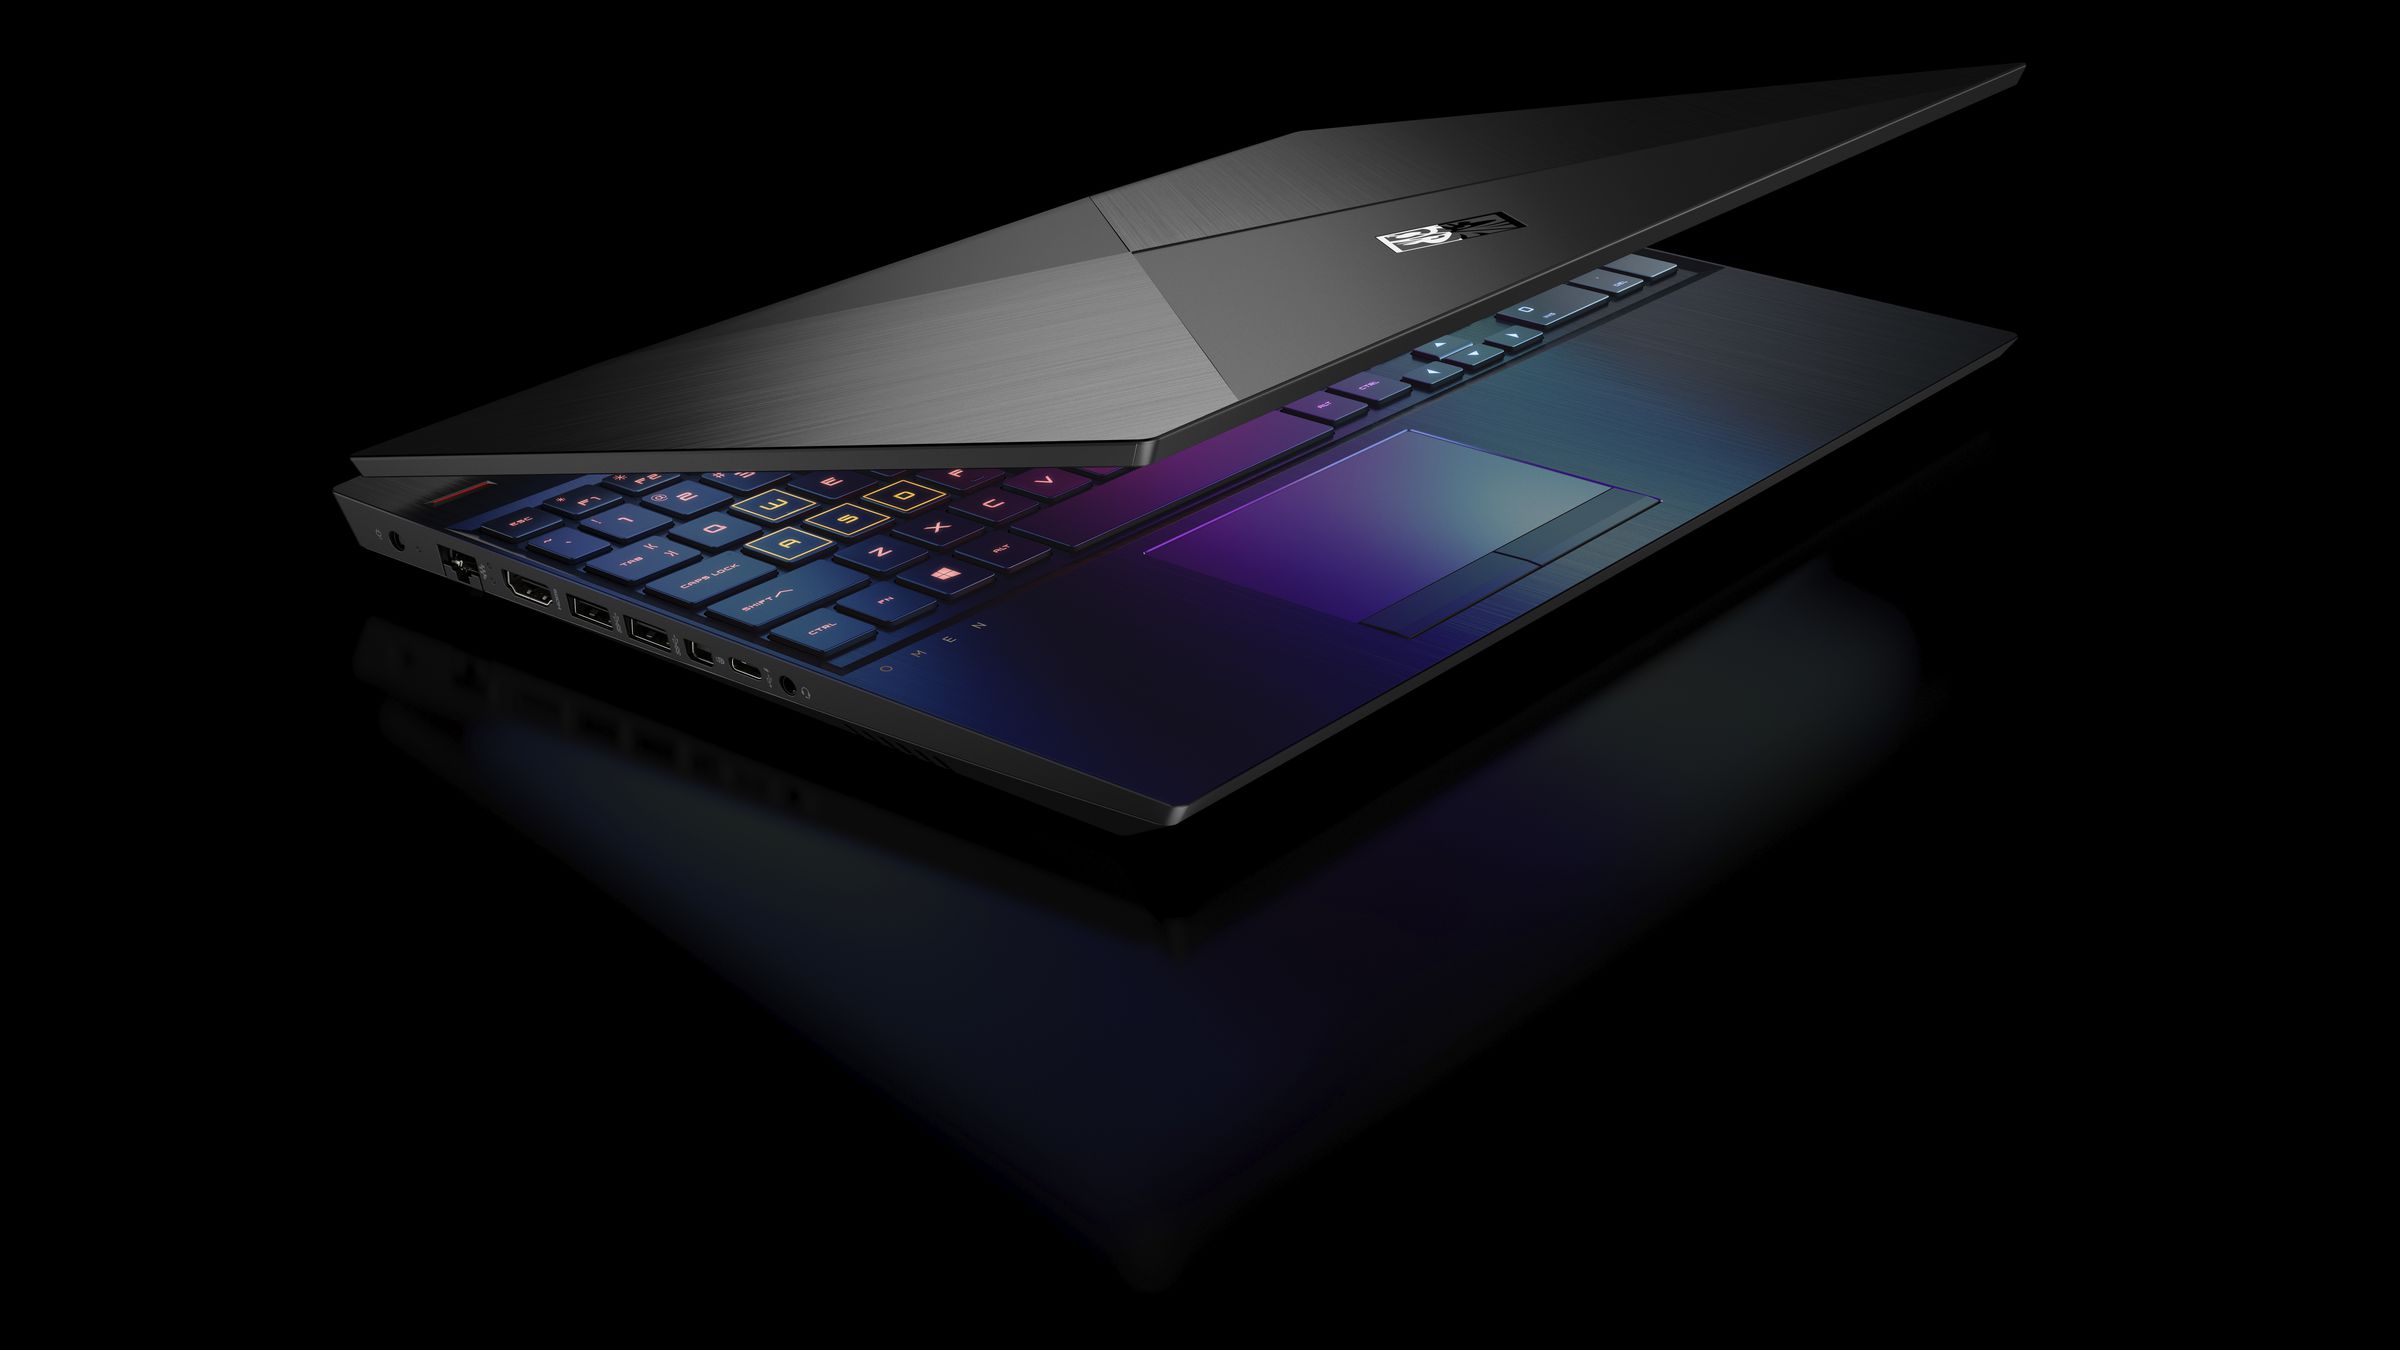 The 2020 HP Omen will include an RTX 2060 and starts at $999.